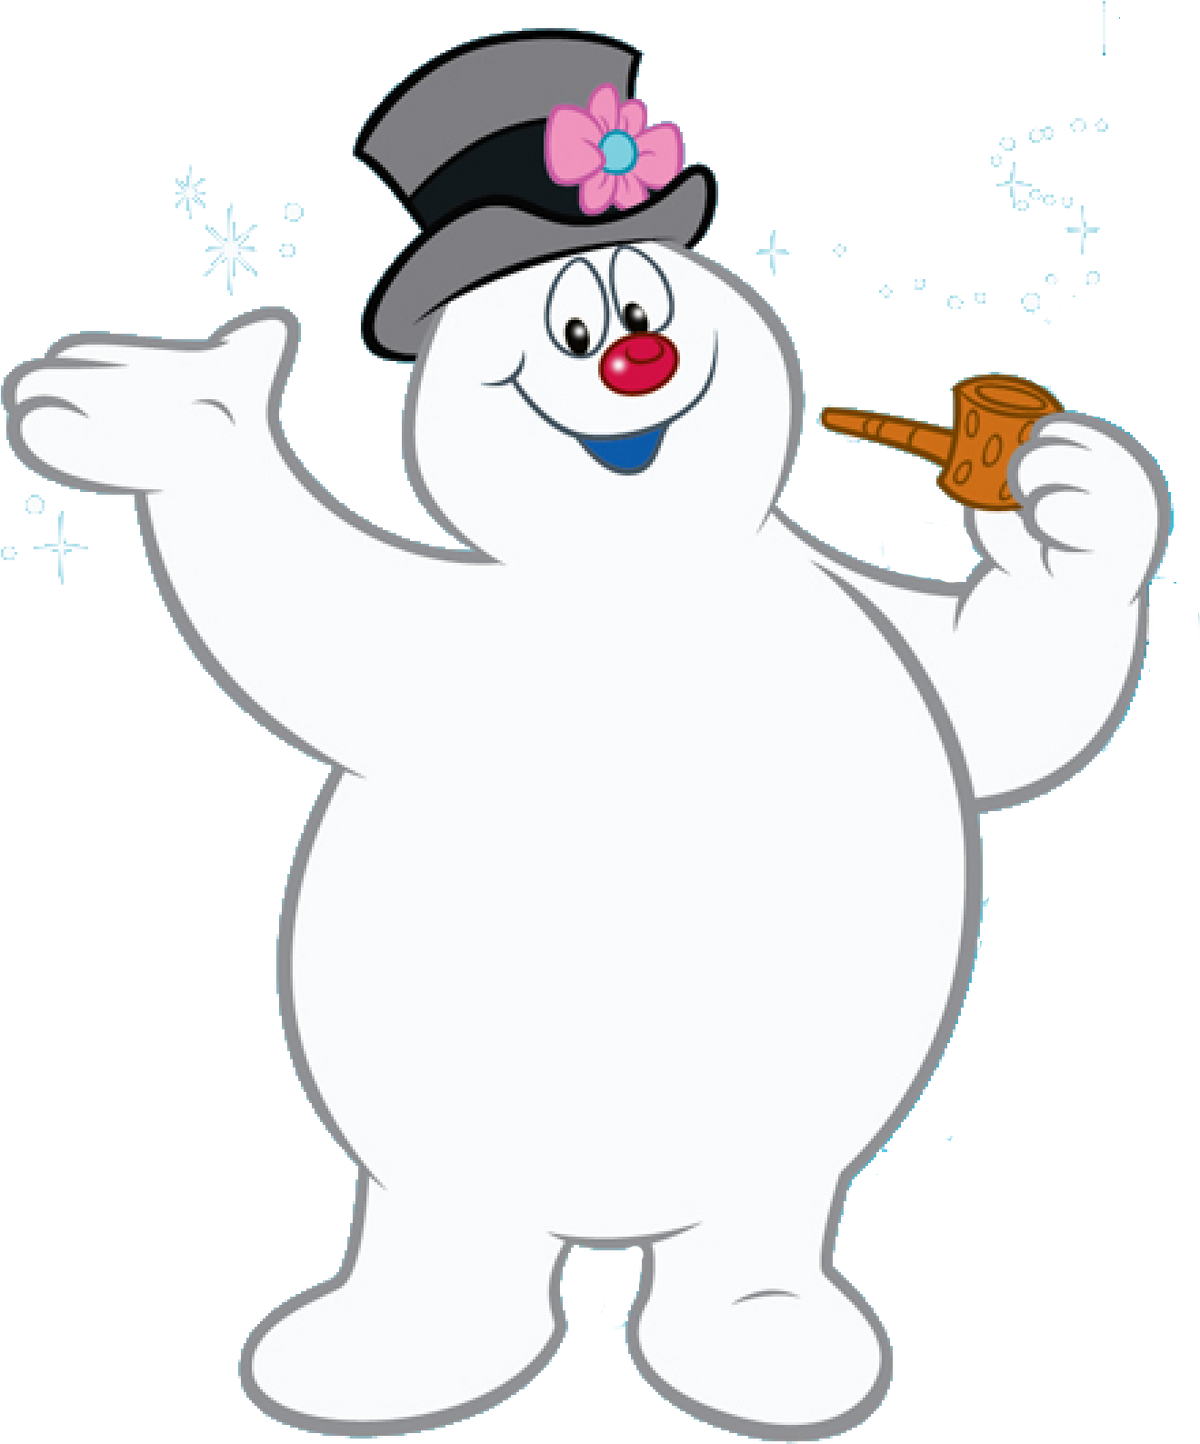 Frosty the Snowman (character) | What if DreamWorks was founded in